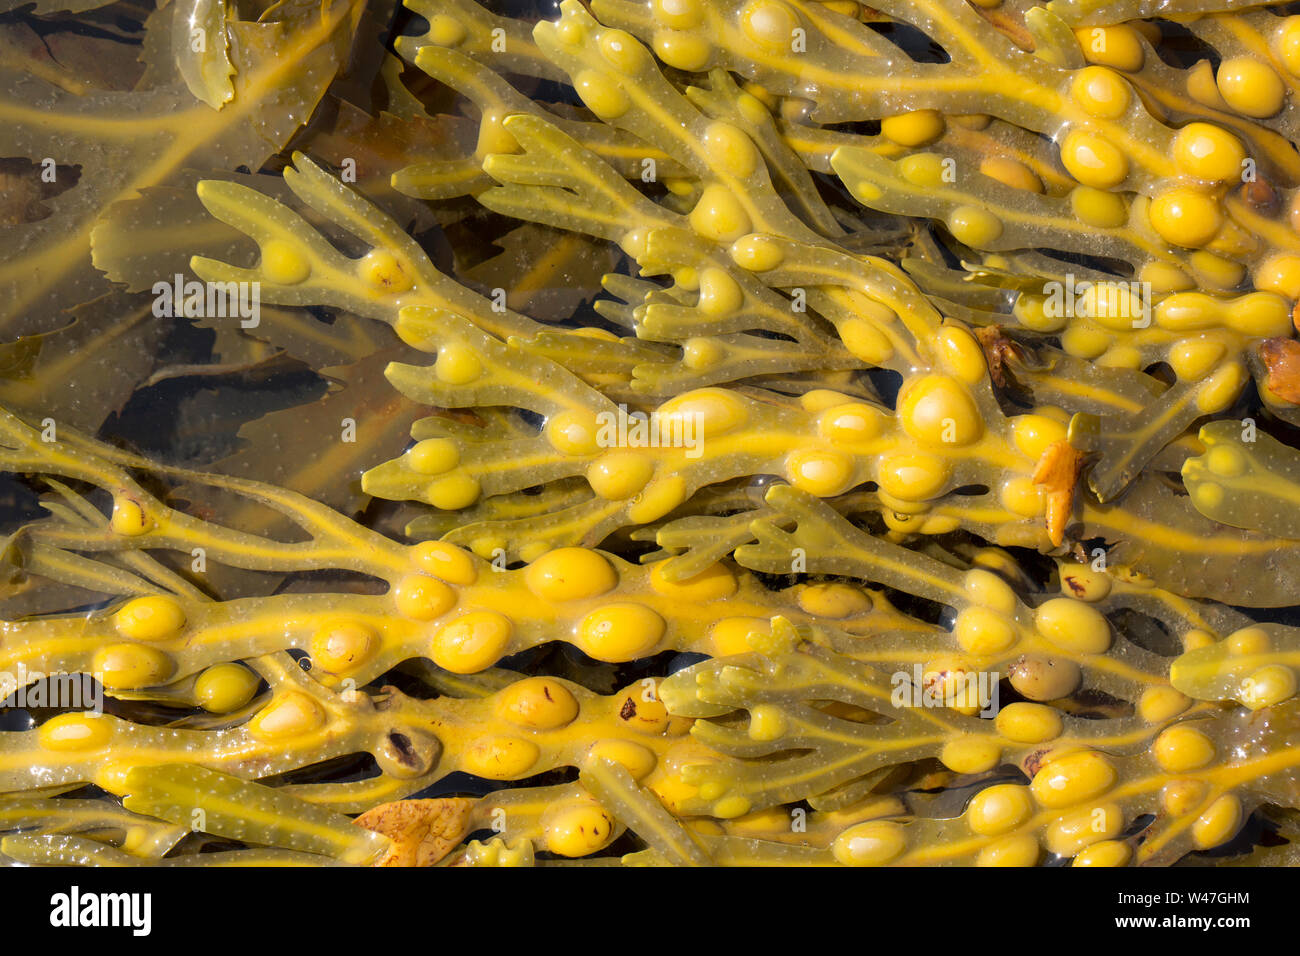 Bladder Wrack seaweed, Fucus vesiculosus, growing in Portland Harbour in Dorset close to the shoreline. Photographed at low water. Dorset England UK G Stock Photo